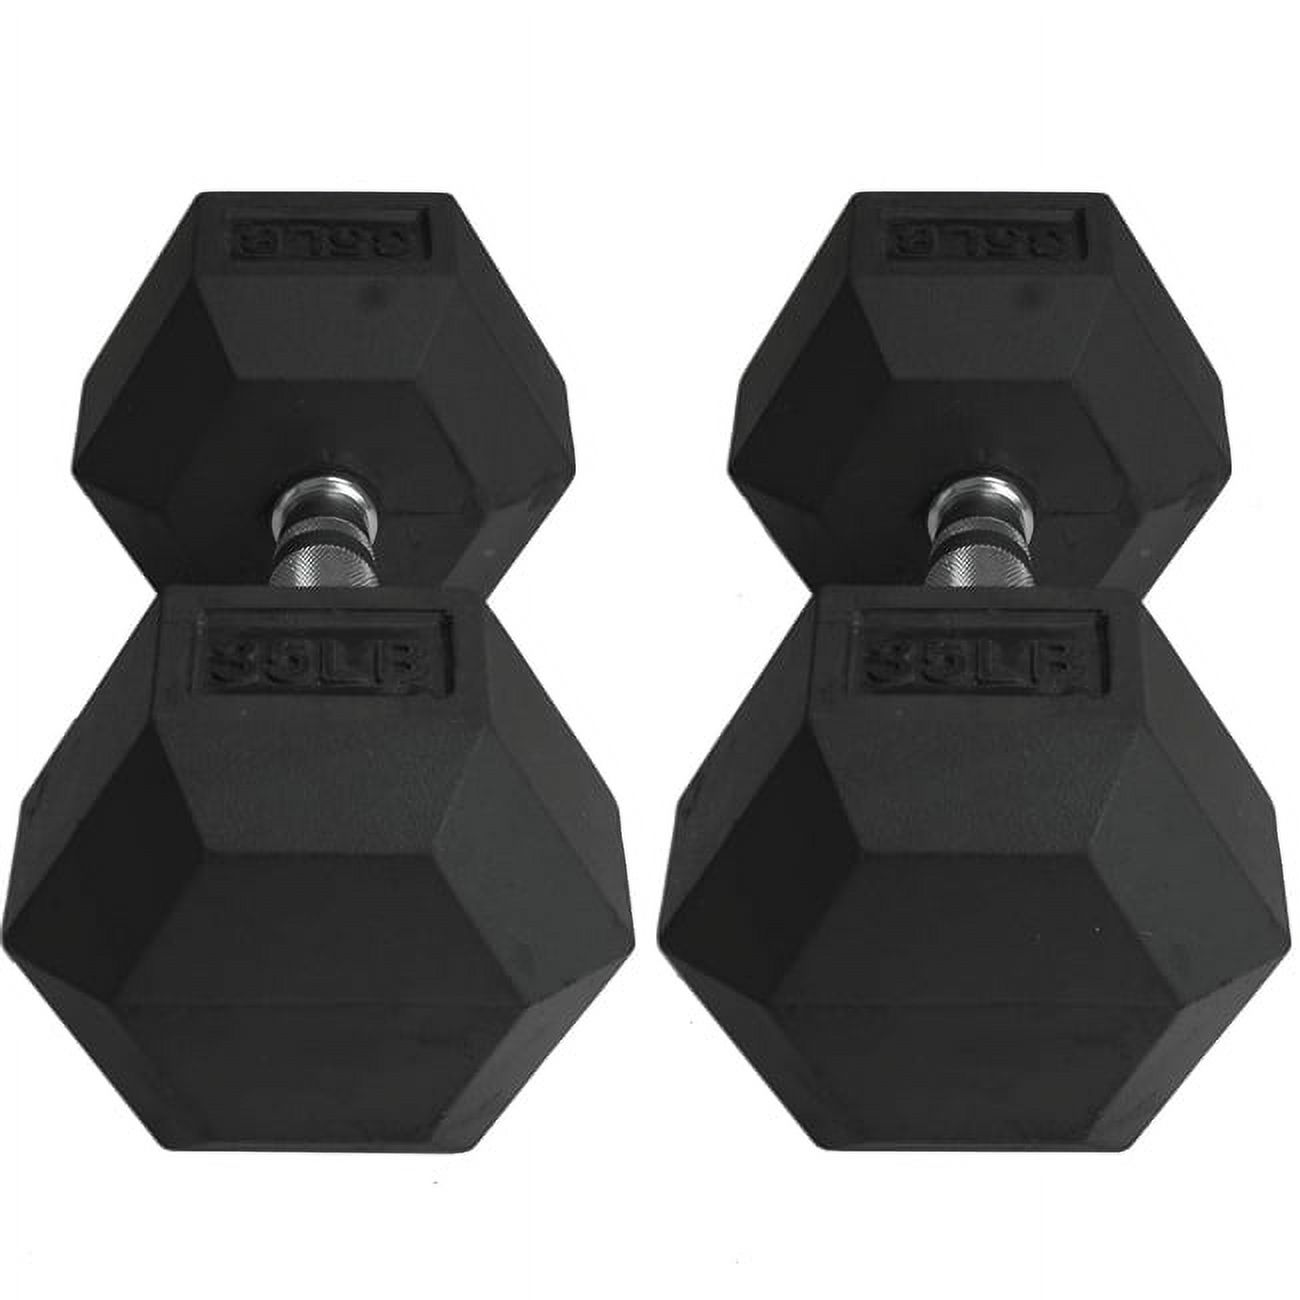 Titan Fitness 35 LB Pair Free Weights, Black Rubber Coated Hex Dumbbell, Ergonomic Cast Iron Handle, Strength Training - image 4 of 4